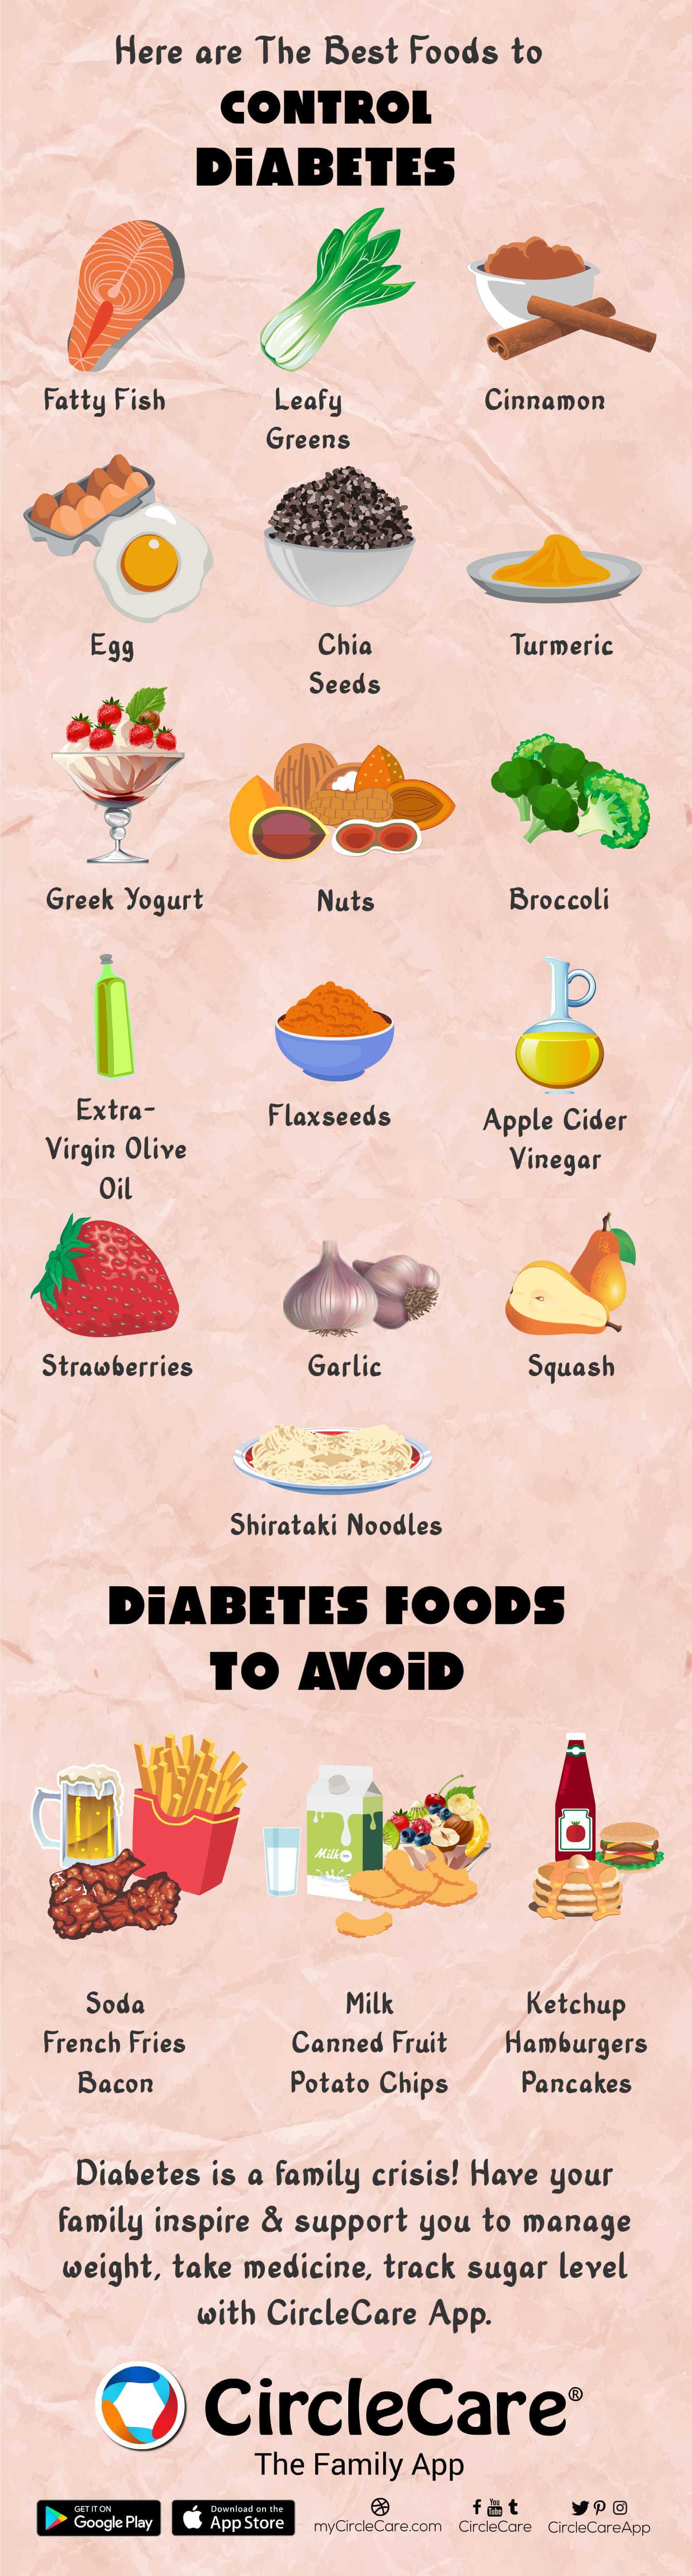 Best foods for controlling diabetes in the family - CircleCare